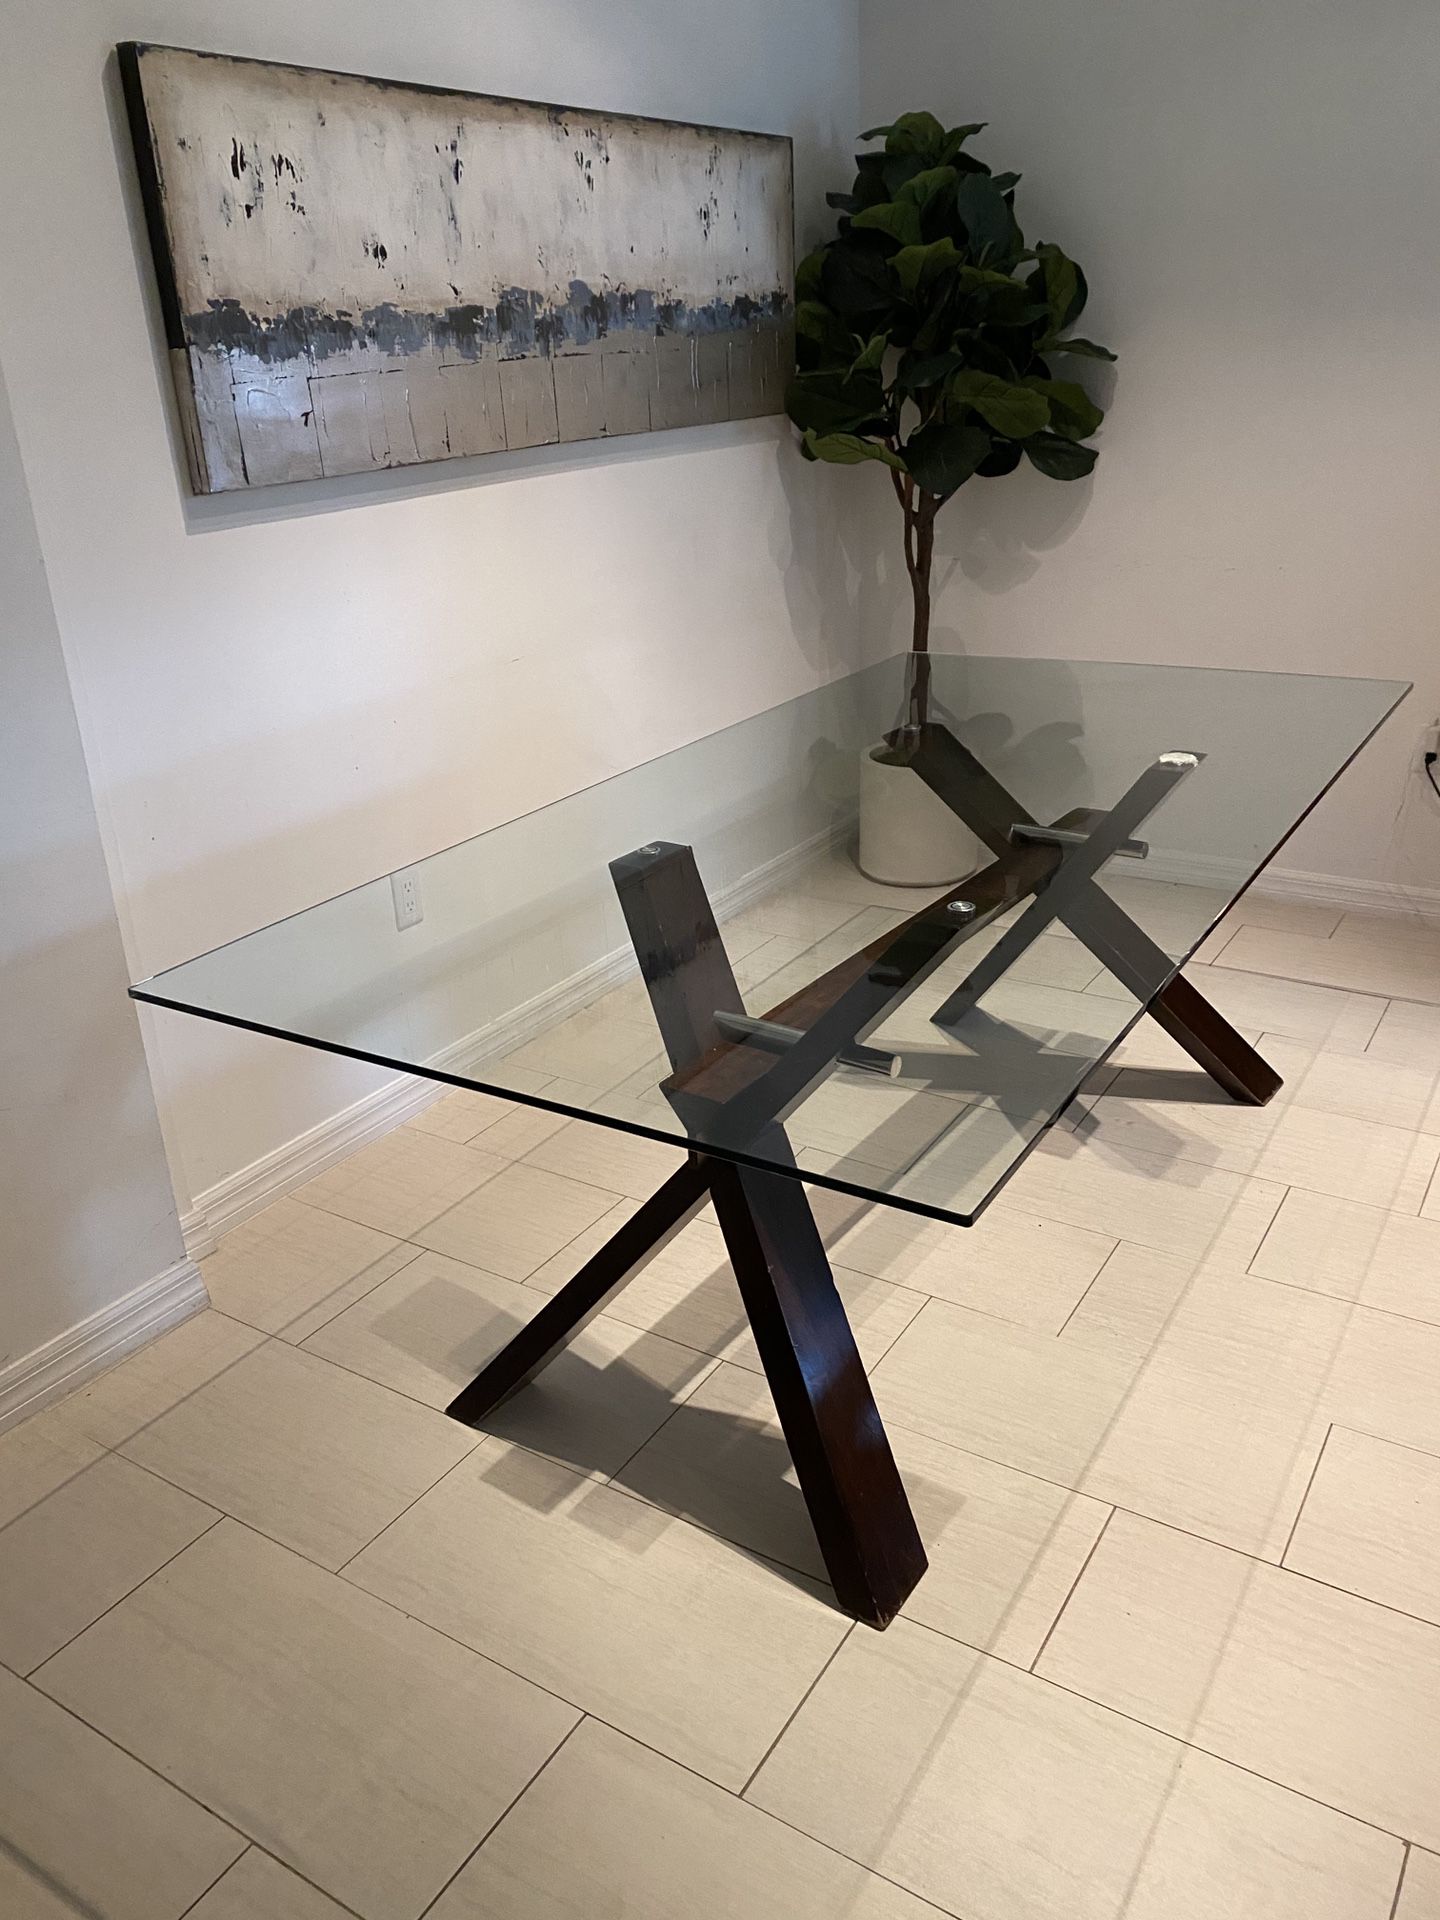 Glass top dining room table - Must pick up